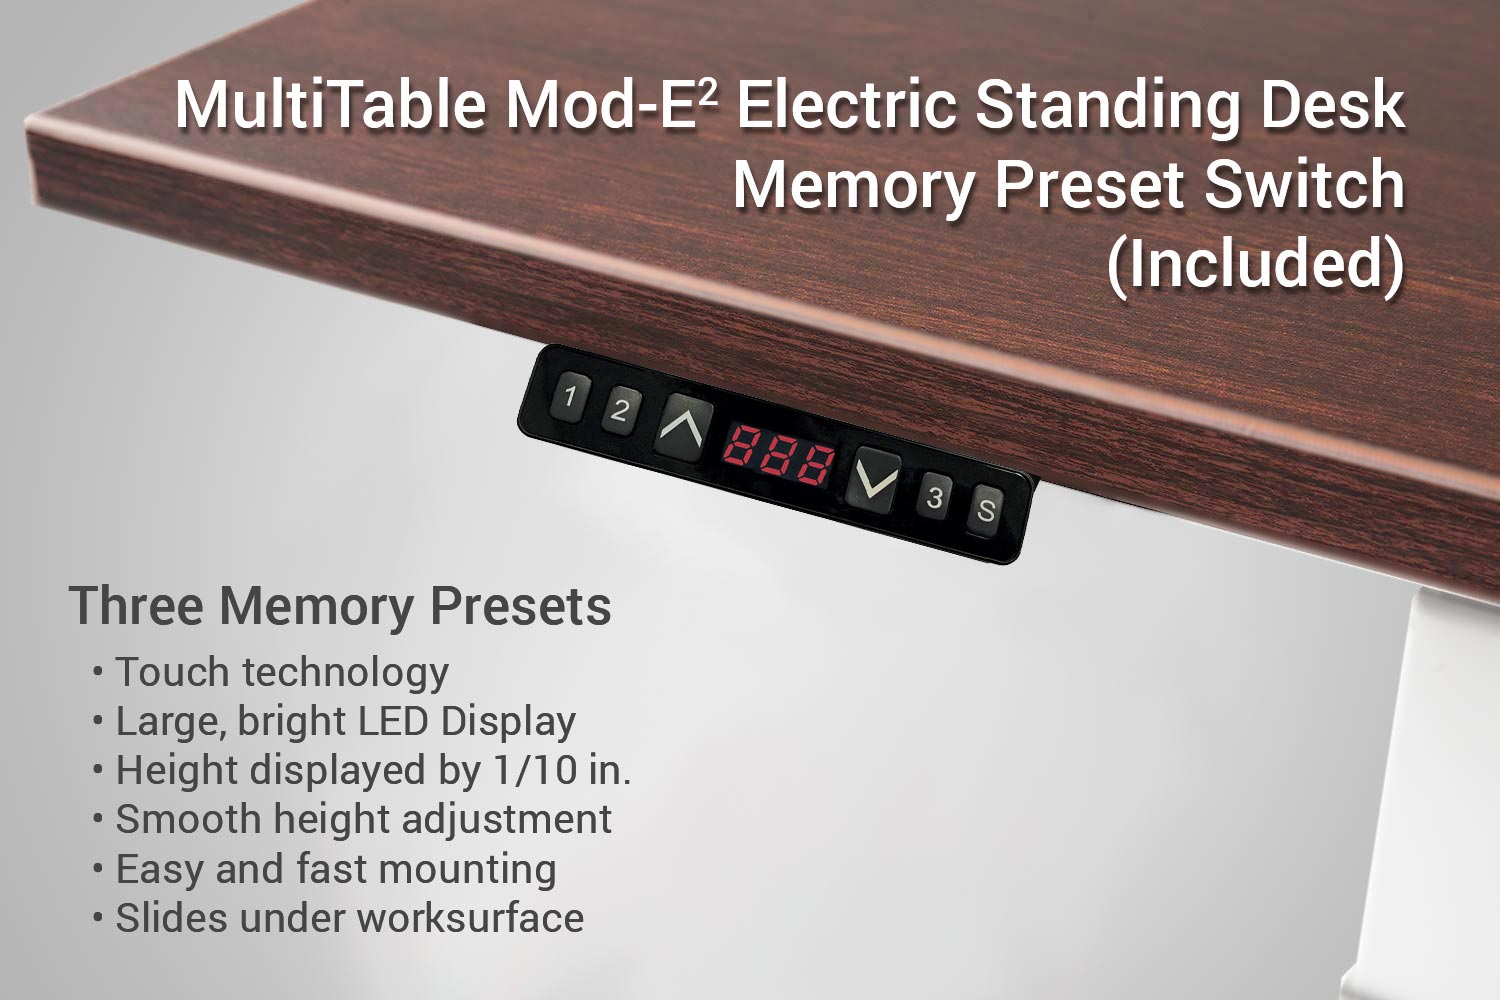 MultiTable Mod-E2 Electric Standing Desk Memory Preset Up Down Switch